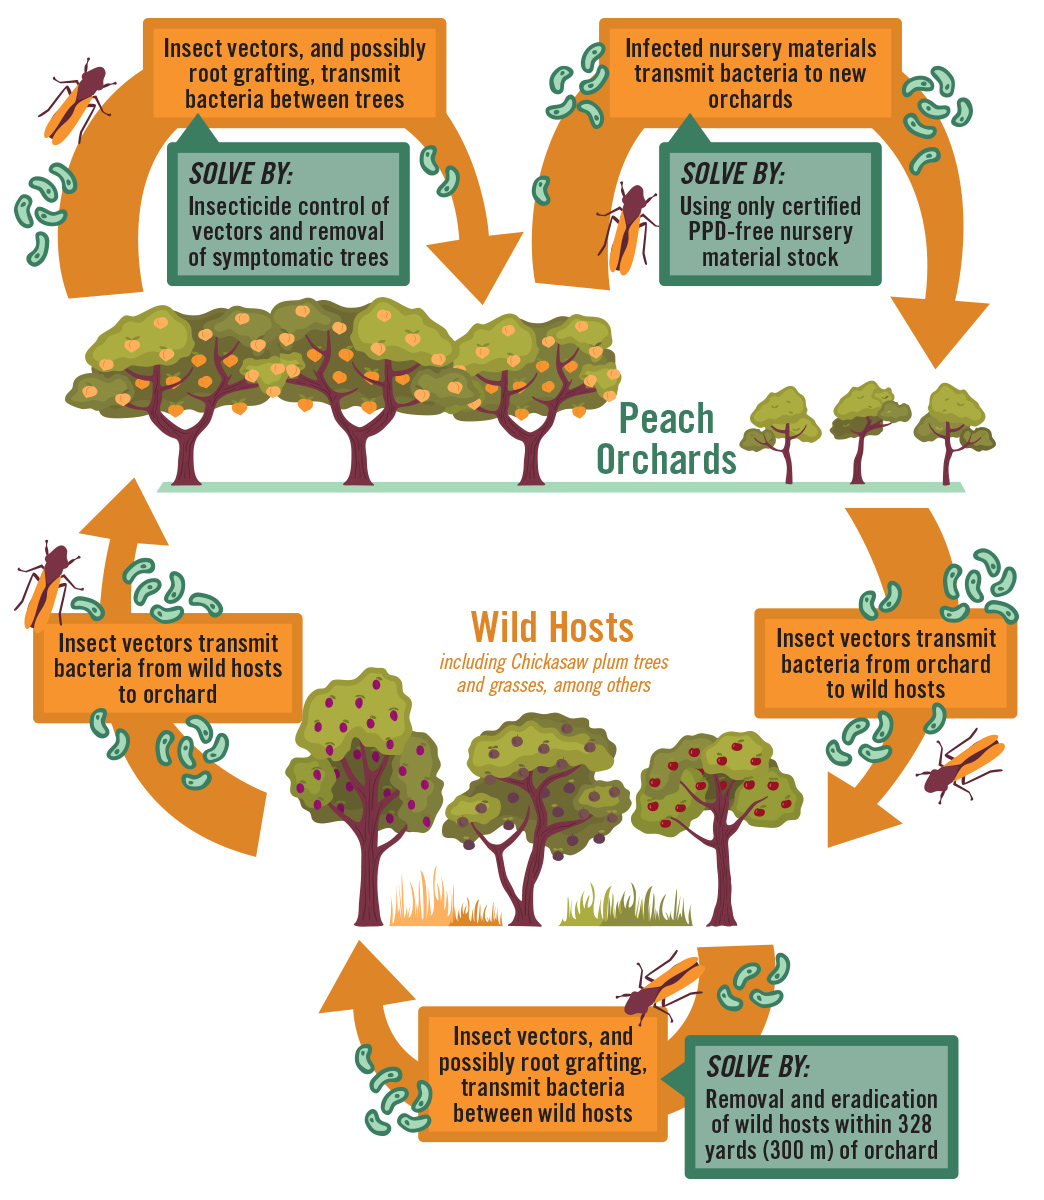 Phony peach disease cycle showing movement between peach orchards and wild hosts including Chickasaw plum trees and grasses, among others